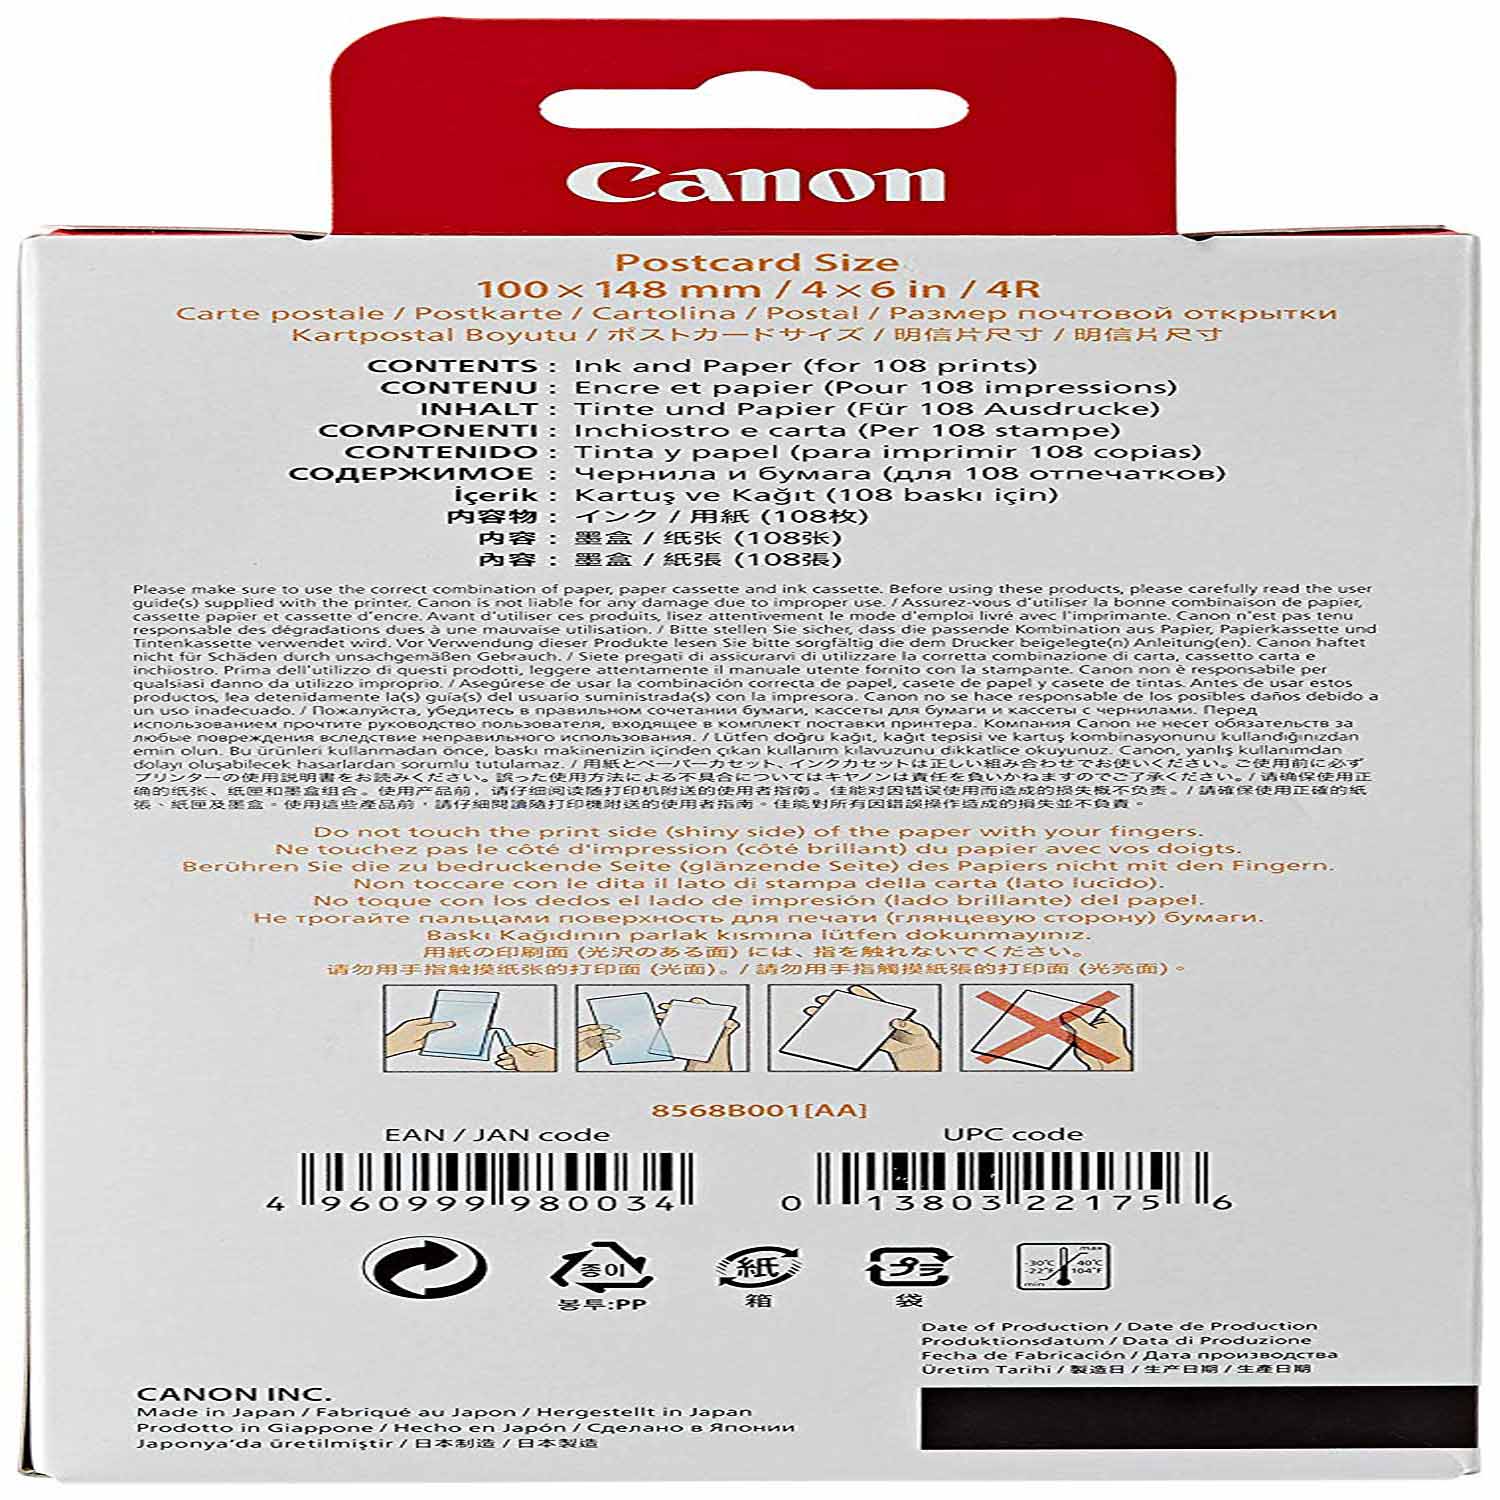 Canon PG-210 XL Pigment Ink Cartridge, Black - image 2 of 2